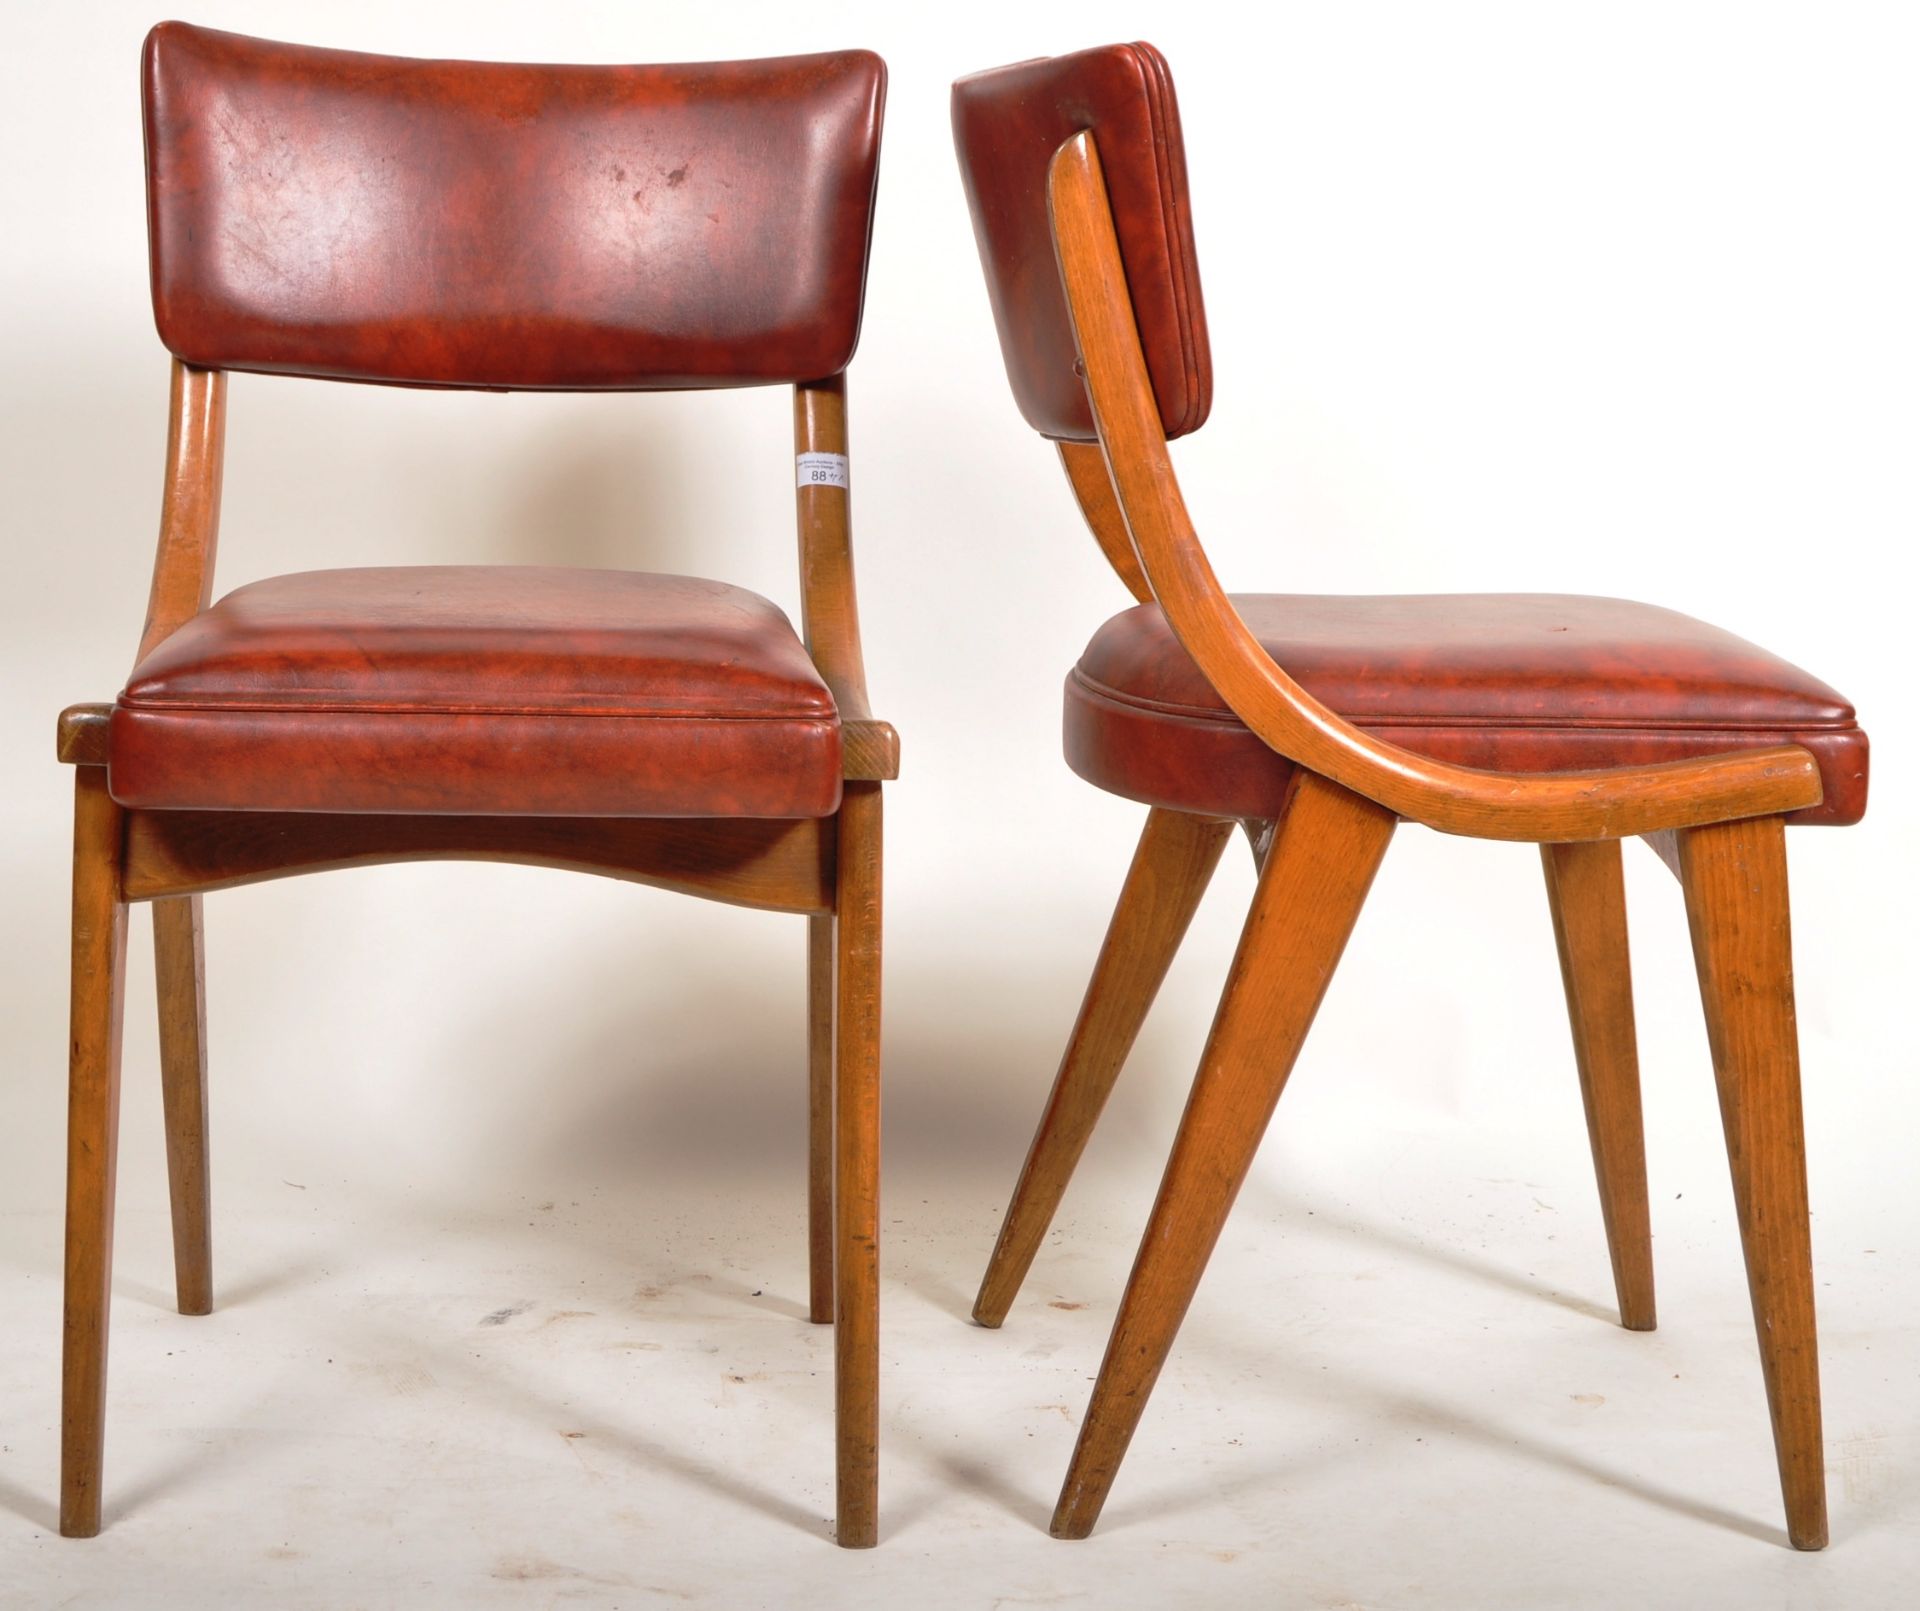 BEN CHAIRS - SET OF ORIGINAL 1960'S DINING CHAIRS - Image 4 of 6